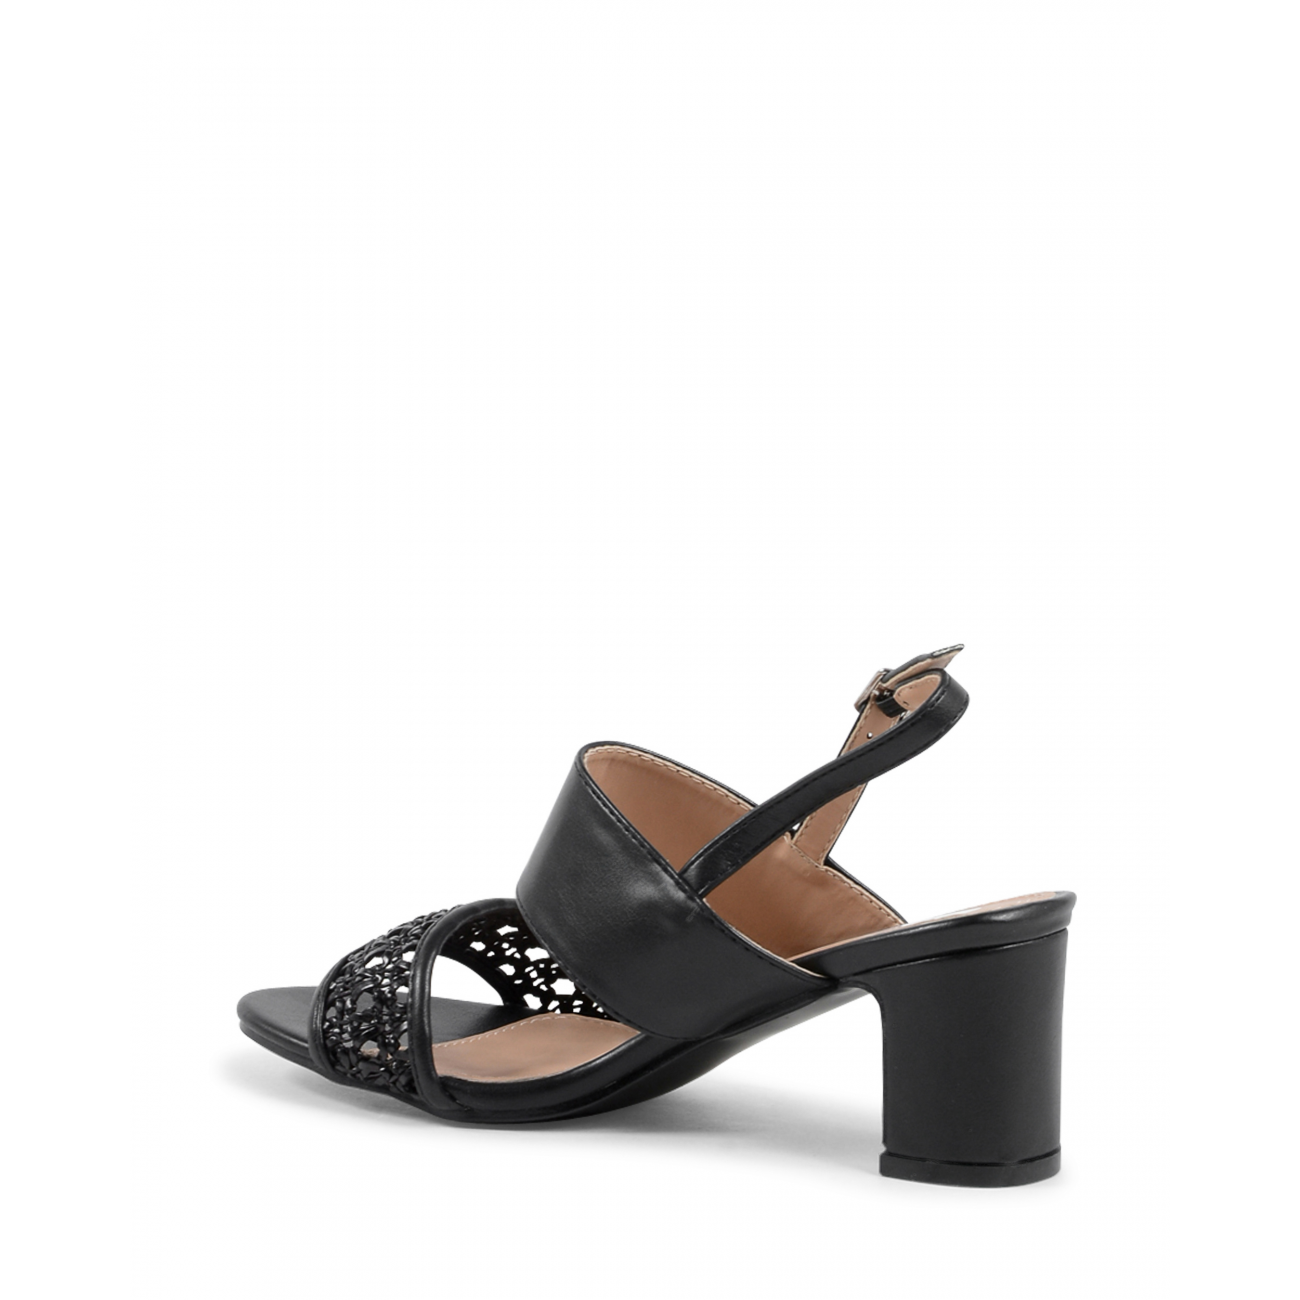 By: 19V69 Italia- Details: V07 BLACK- Color: Black - Composition: 100% SYNTHETIC LEATHER - Sole: 100% SYNTHETIC LEATHER - Heel: 7 cm - Made: CHINA - Season: Spring Summer